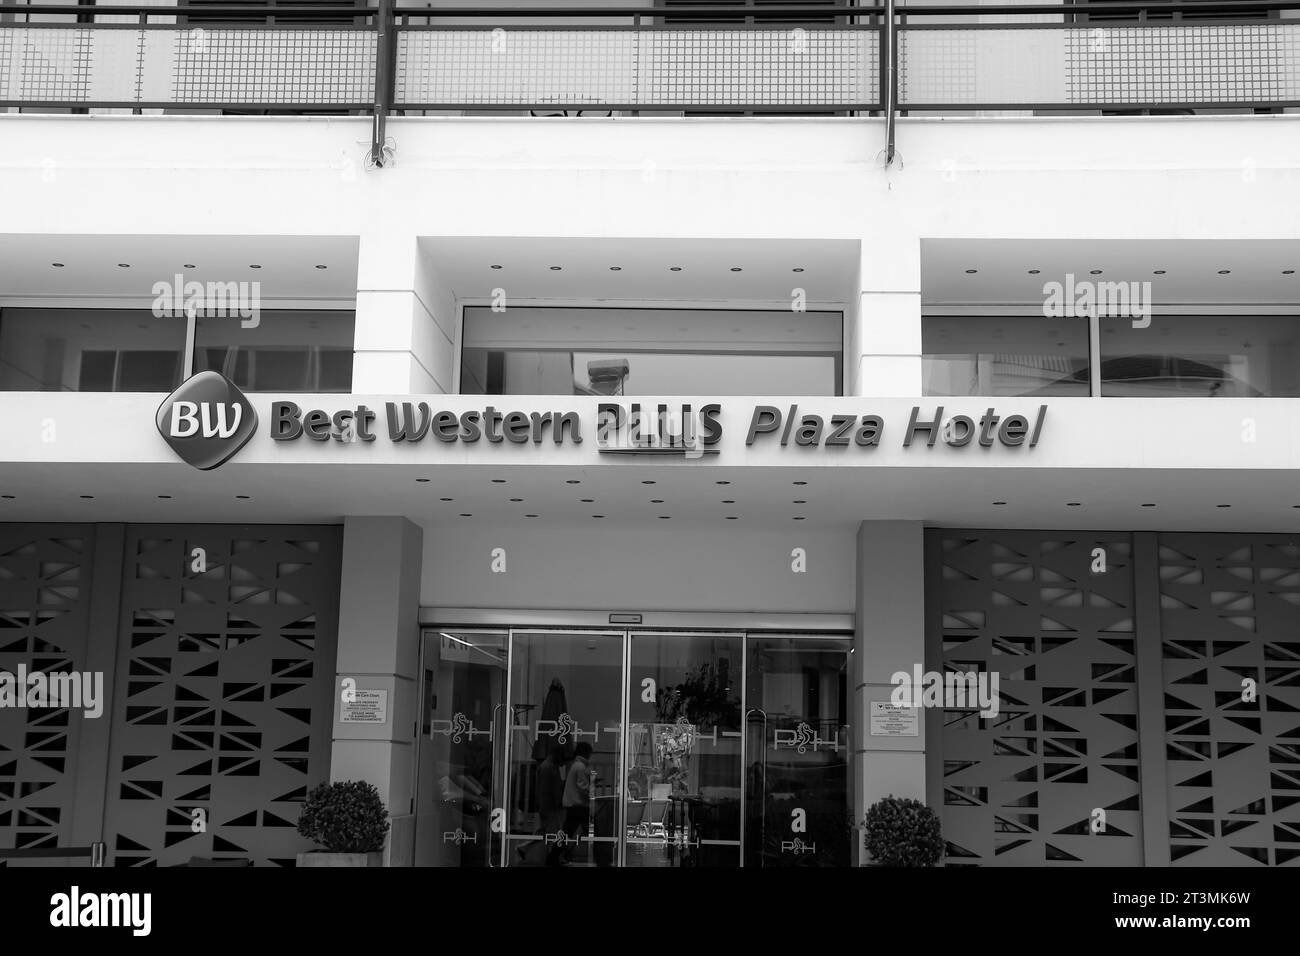 Best Western Plus Plaza Rhodes front sign and entrance to the 4 Star hotel located at the modern center of Rhodes city in black and white Stock Photo